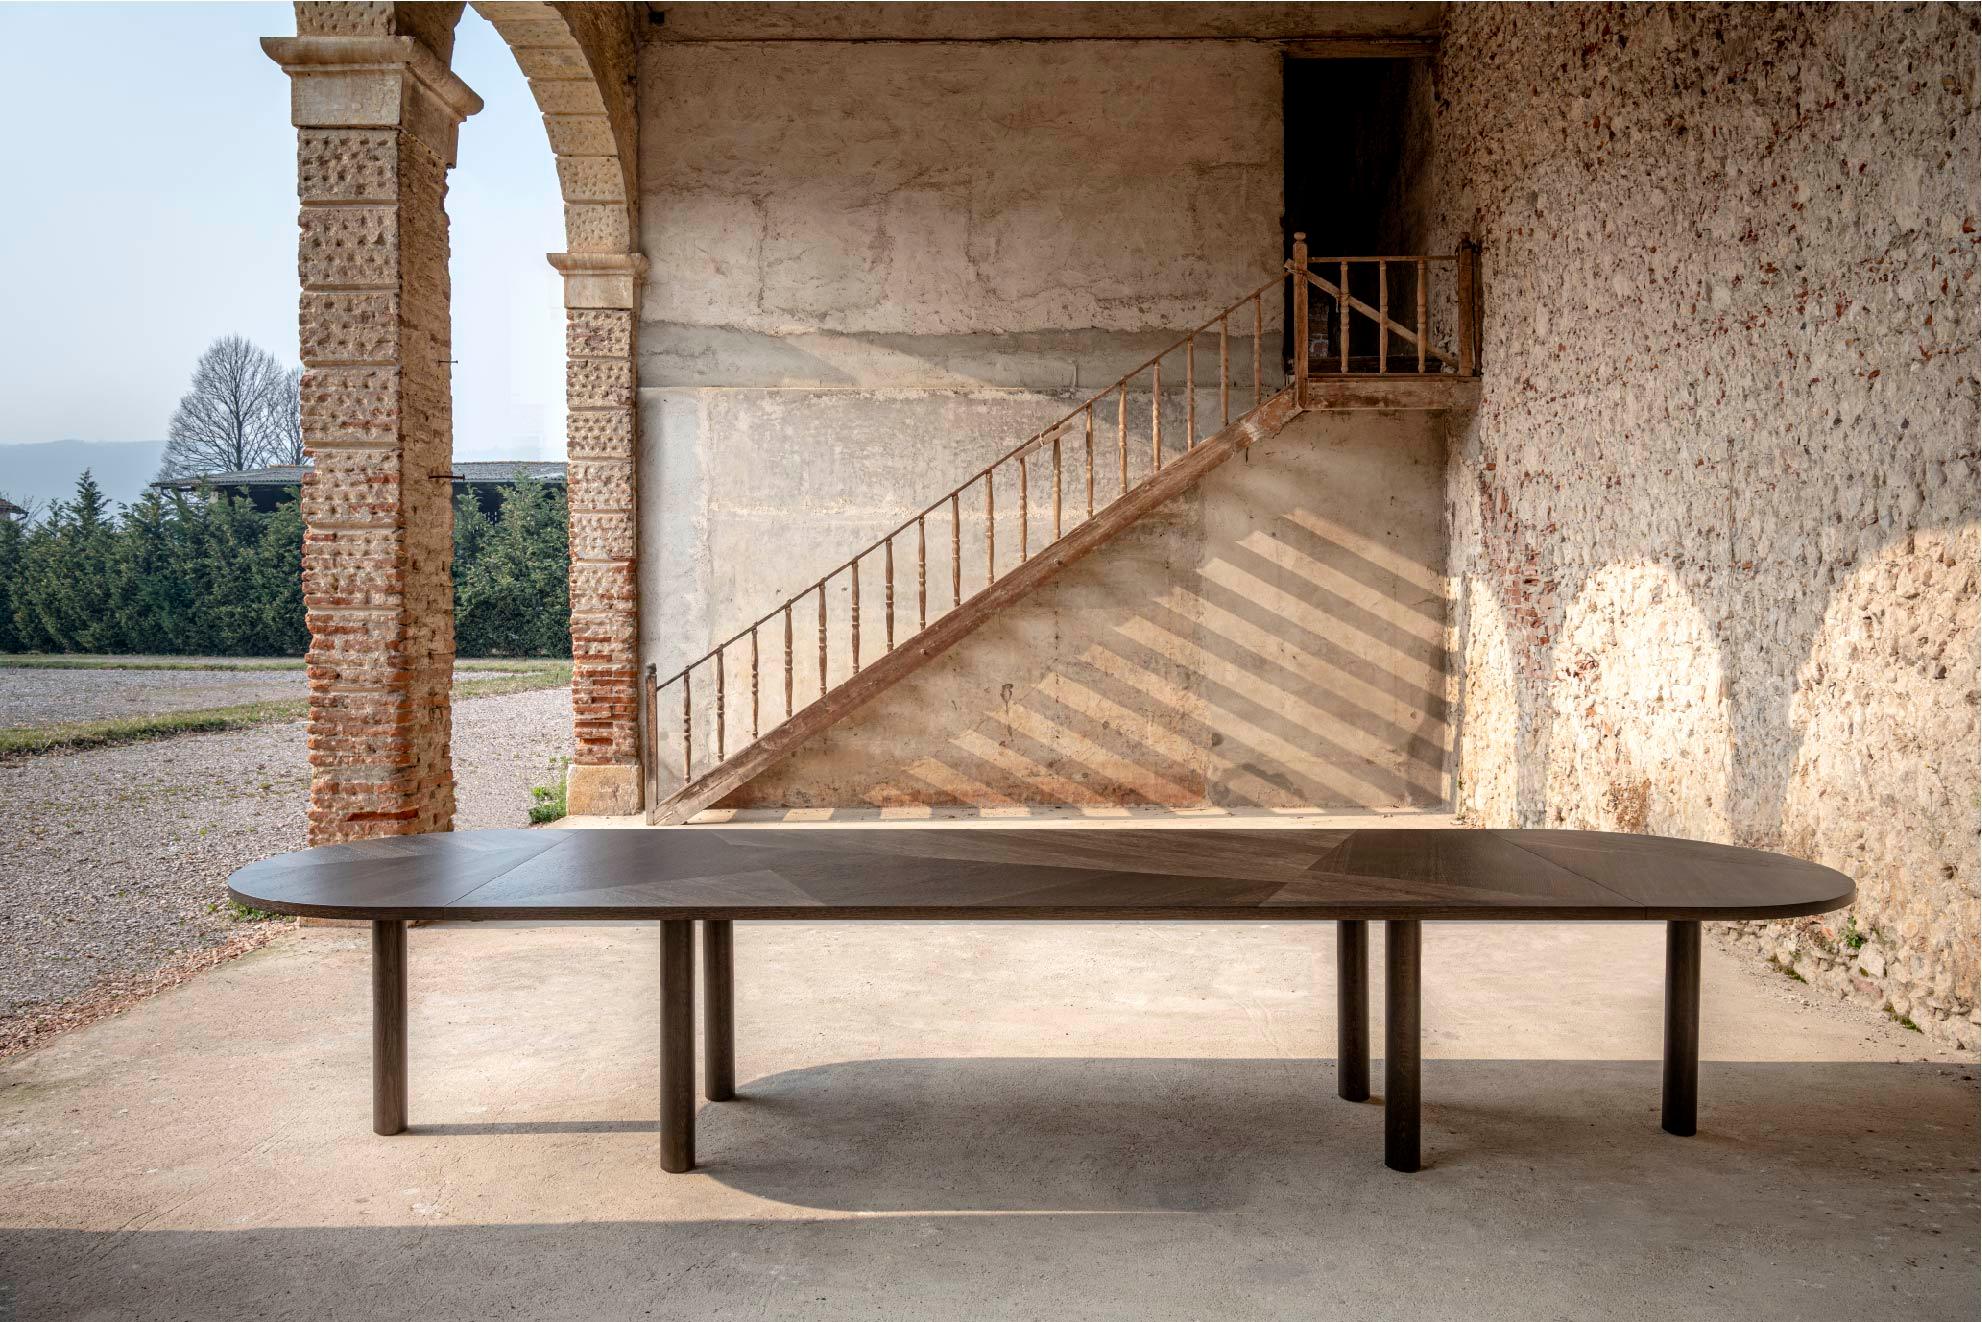 When the client approached me he asked me to design a table that will accommodate everyone around it. Hence the name La Famiglia.

The table is made from European Oak, its basic size is 400cm x 120cm, only 3.2cm thick. 
The extensions 60cm and